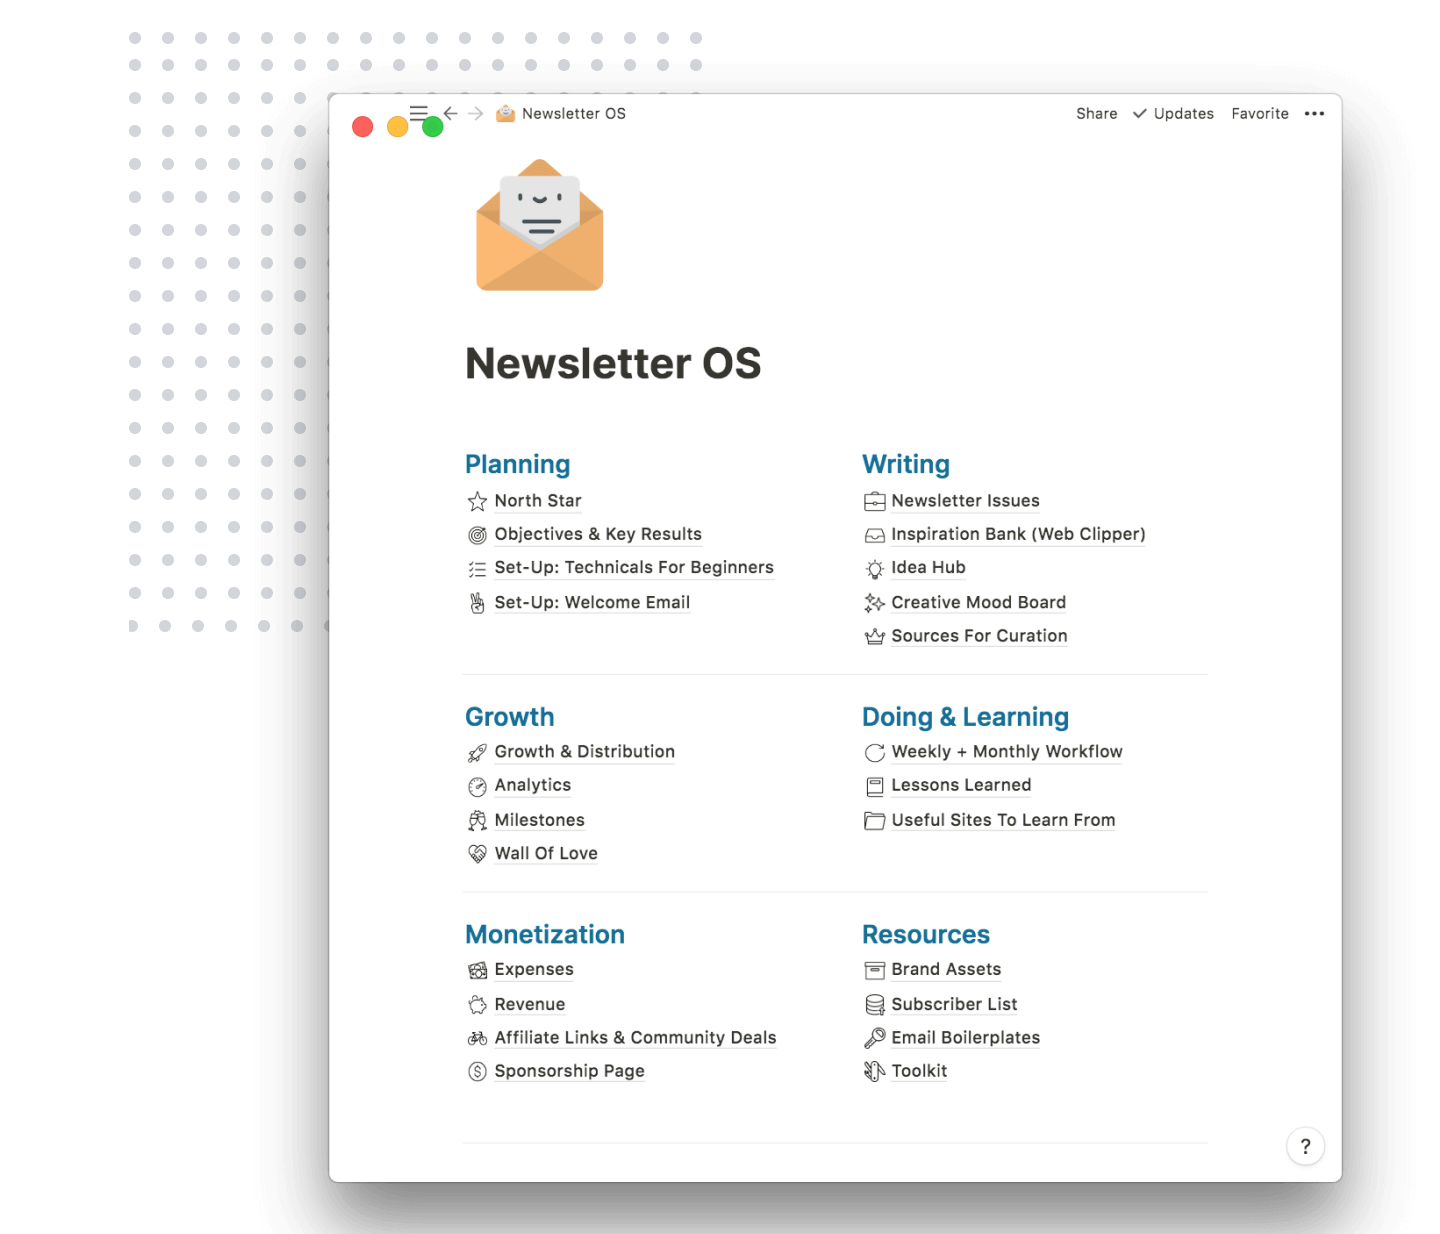 Newsletter OS Overview